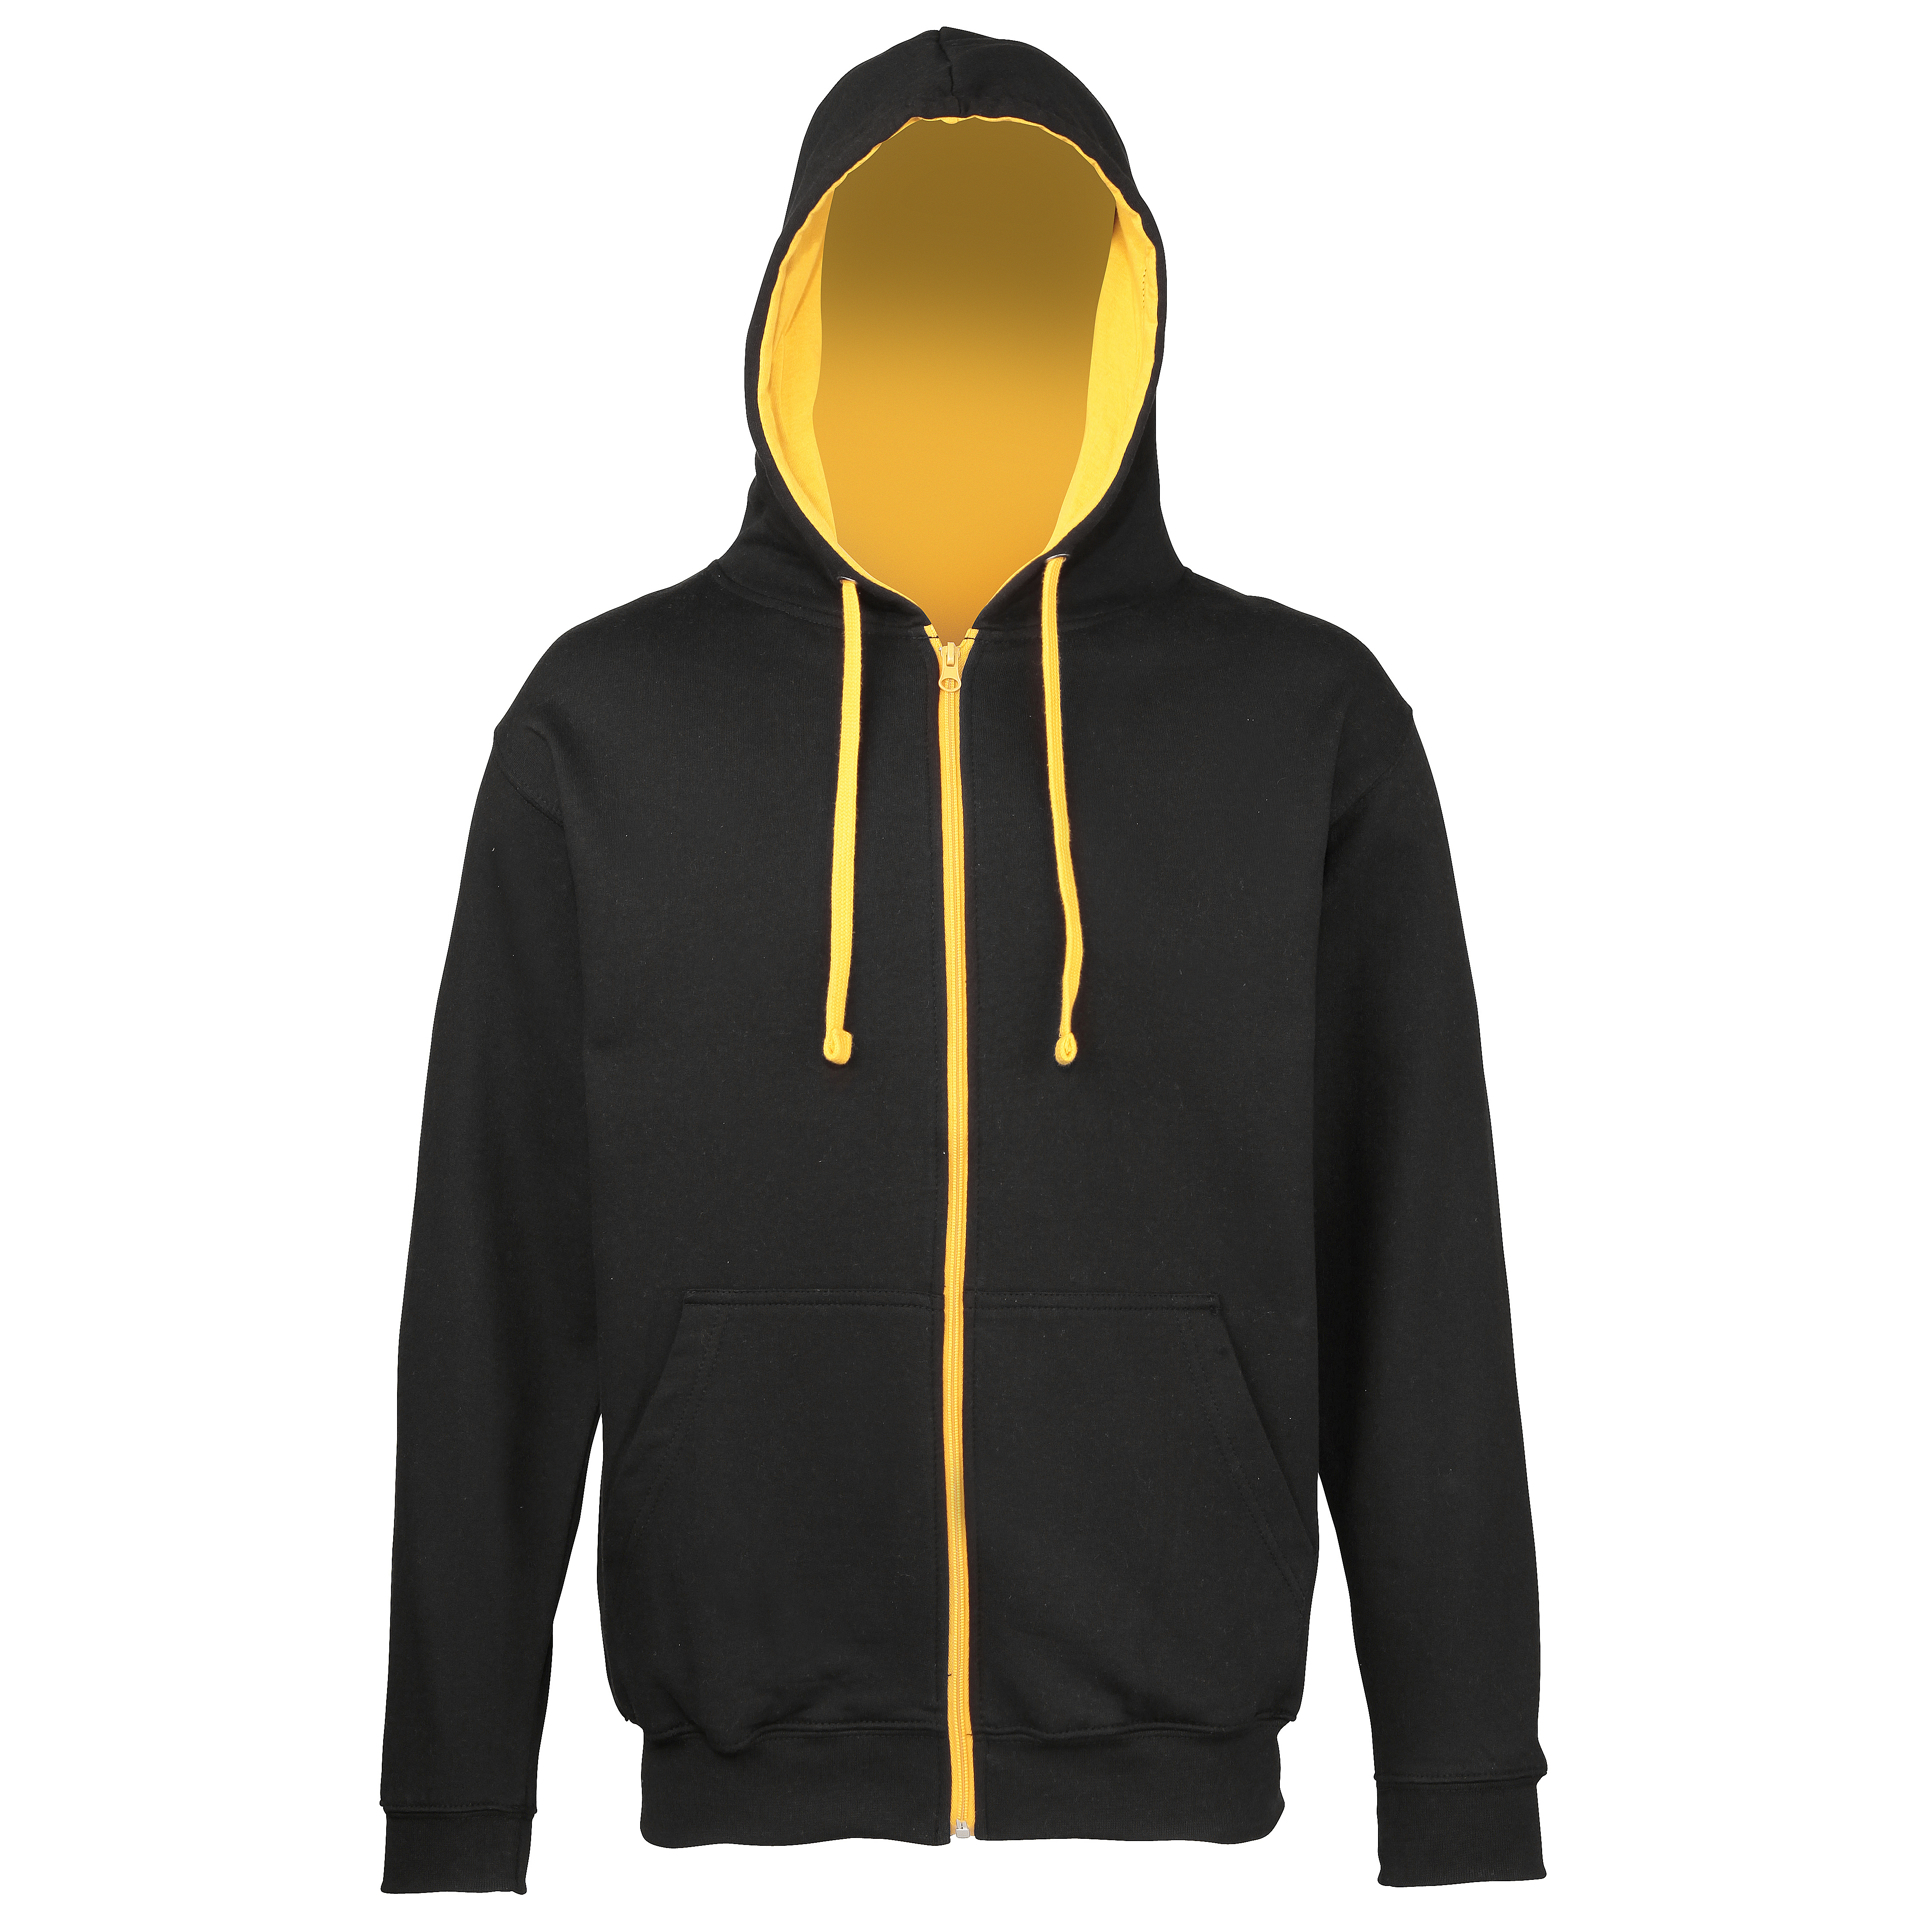 Men's Varsity Hoodie in black with gold details and lining